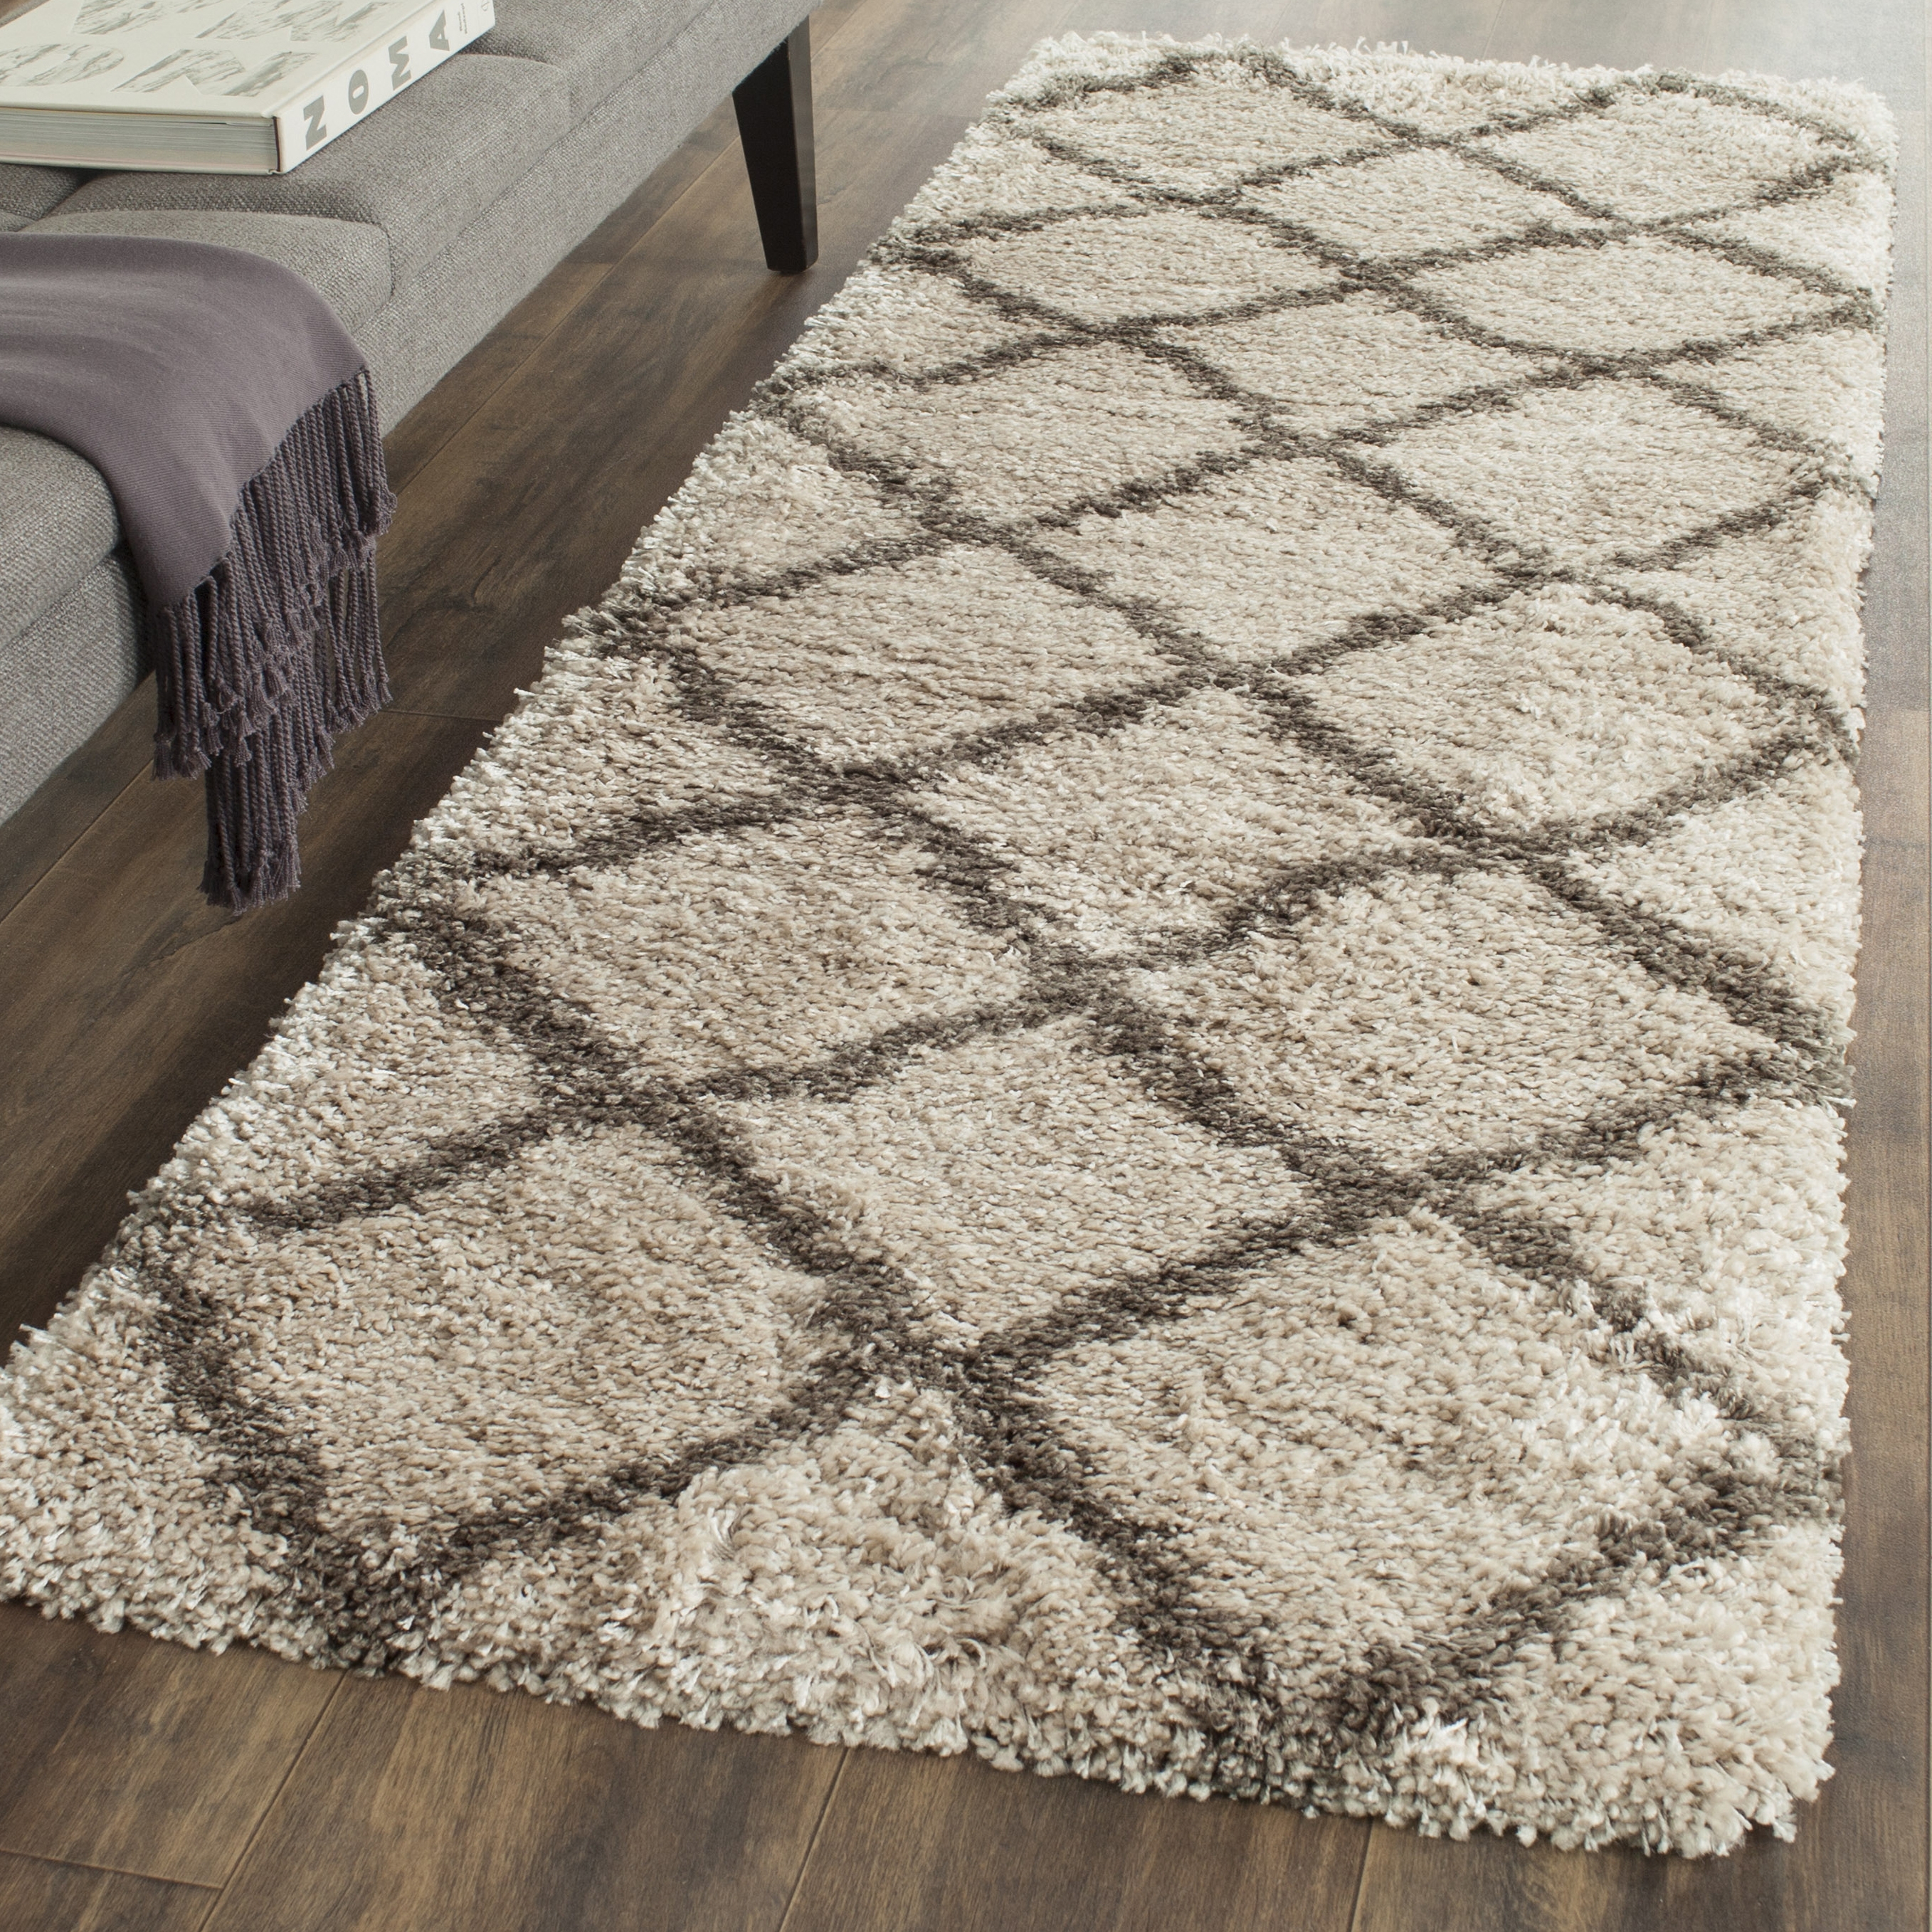 Arlo Home Woven Area Rug, SGB489D, Taupe/Grey,  2' 3" X 11' - Image 1